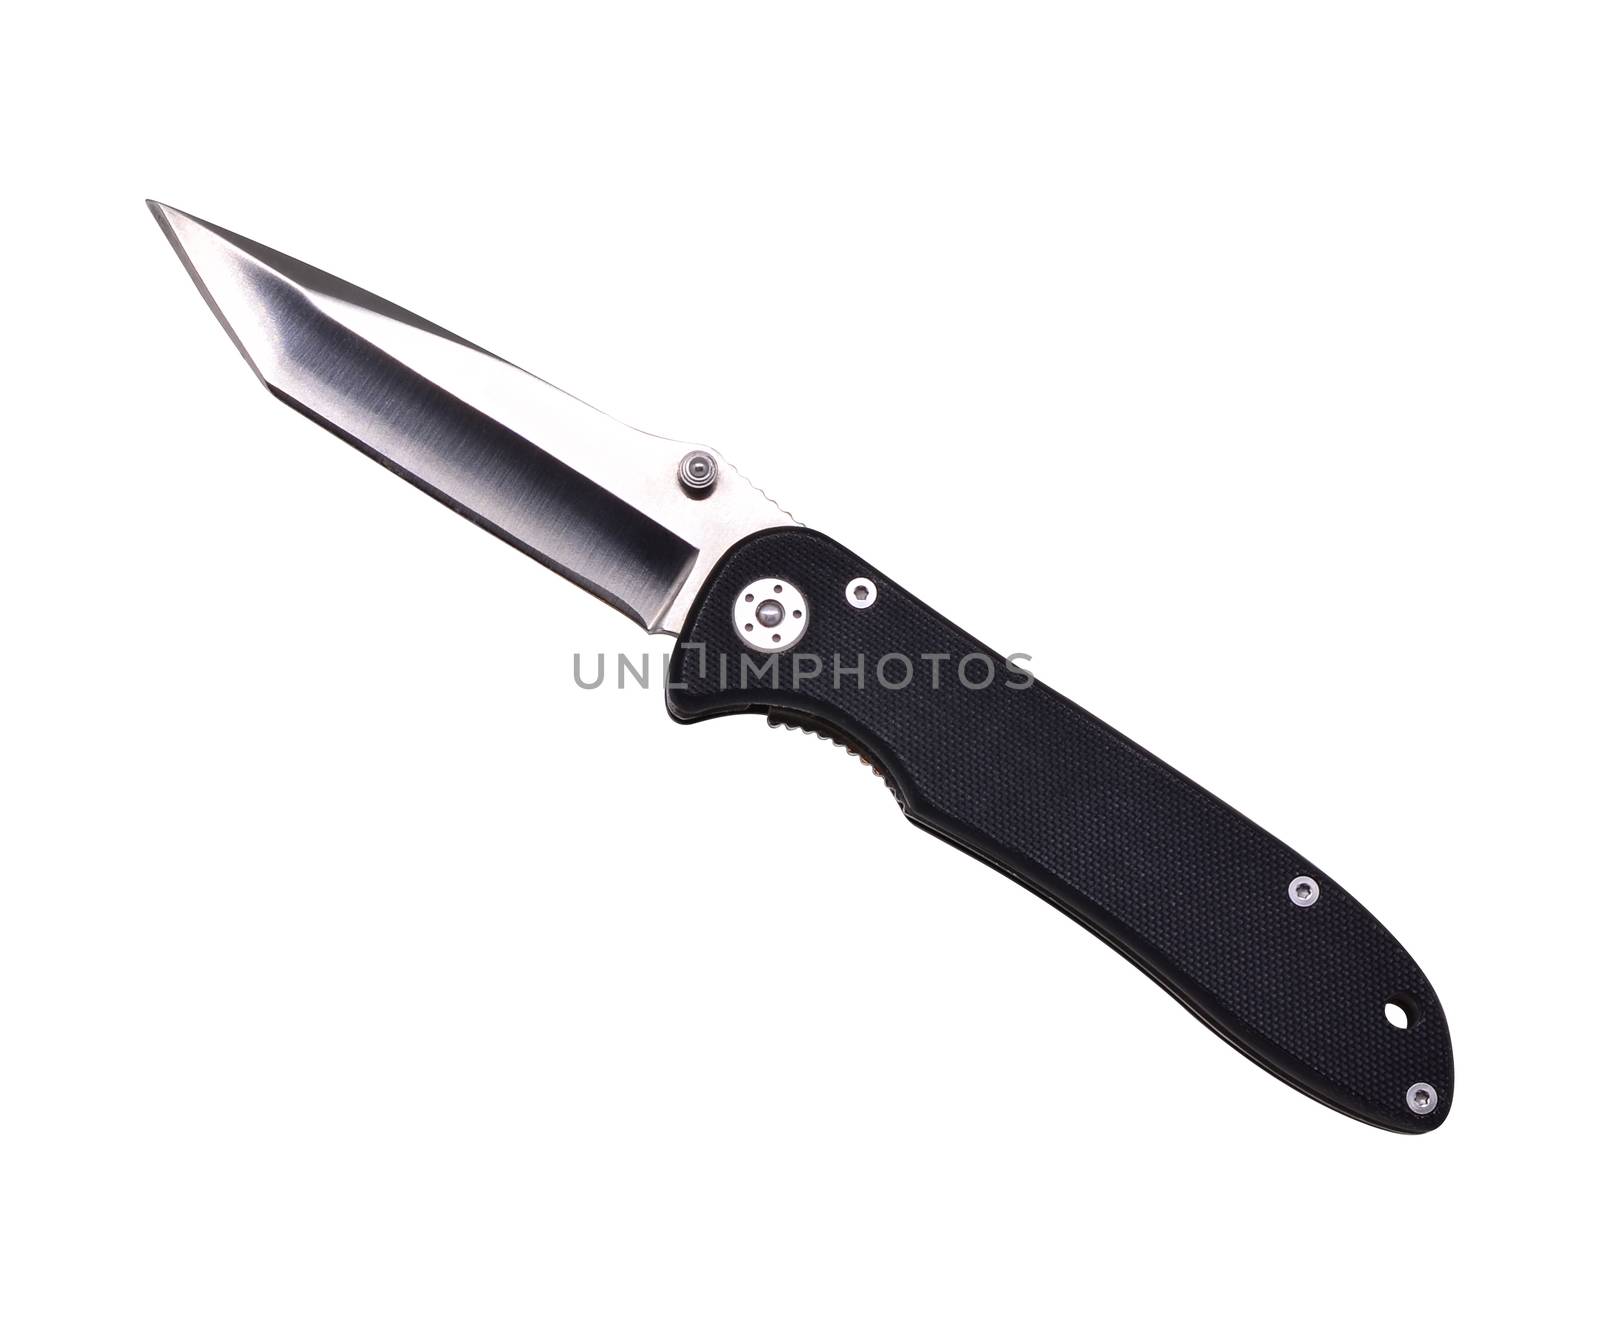 Penknife on white background clipping path by phochi